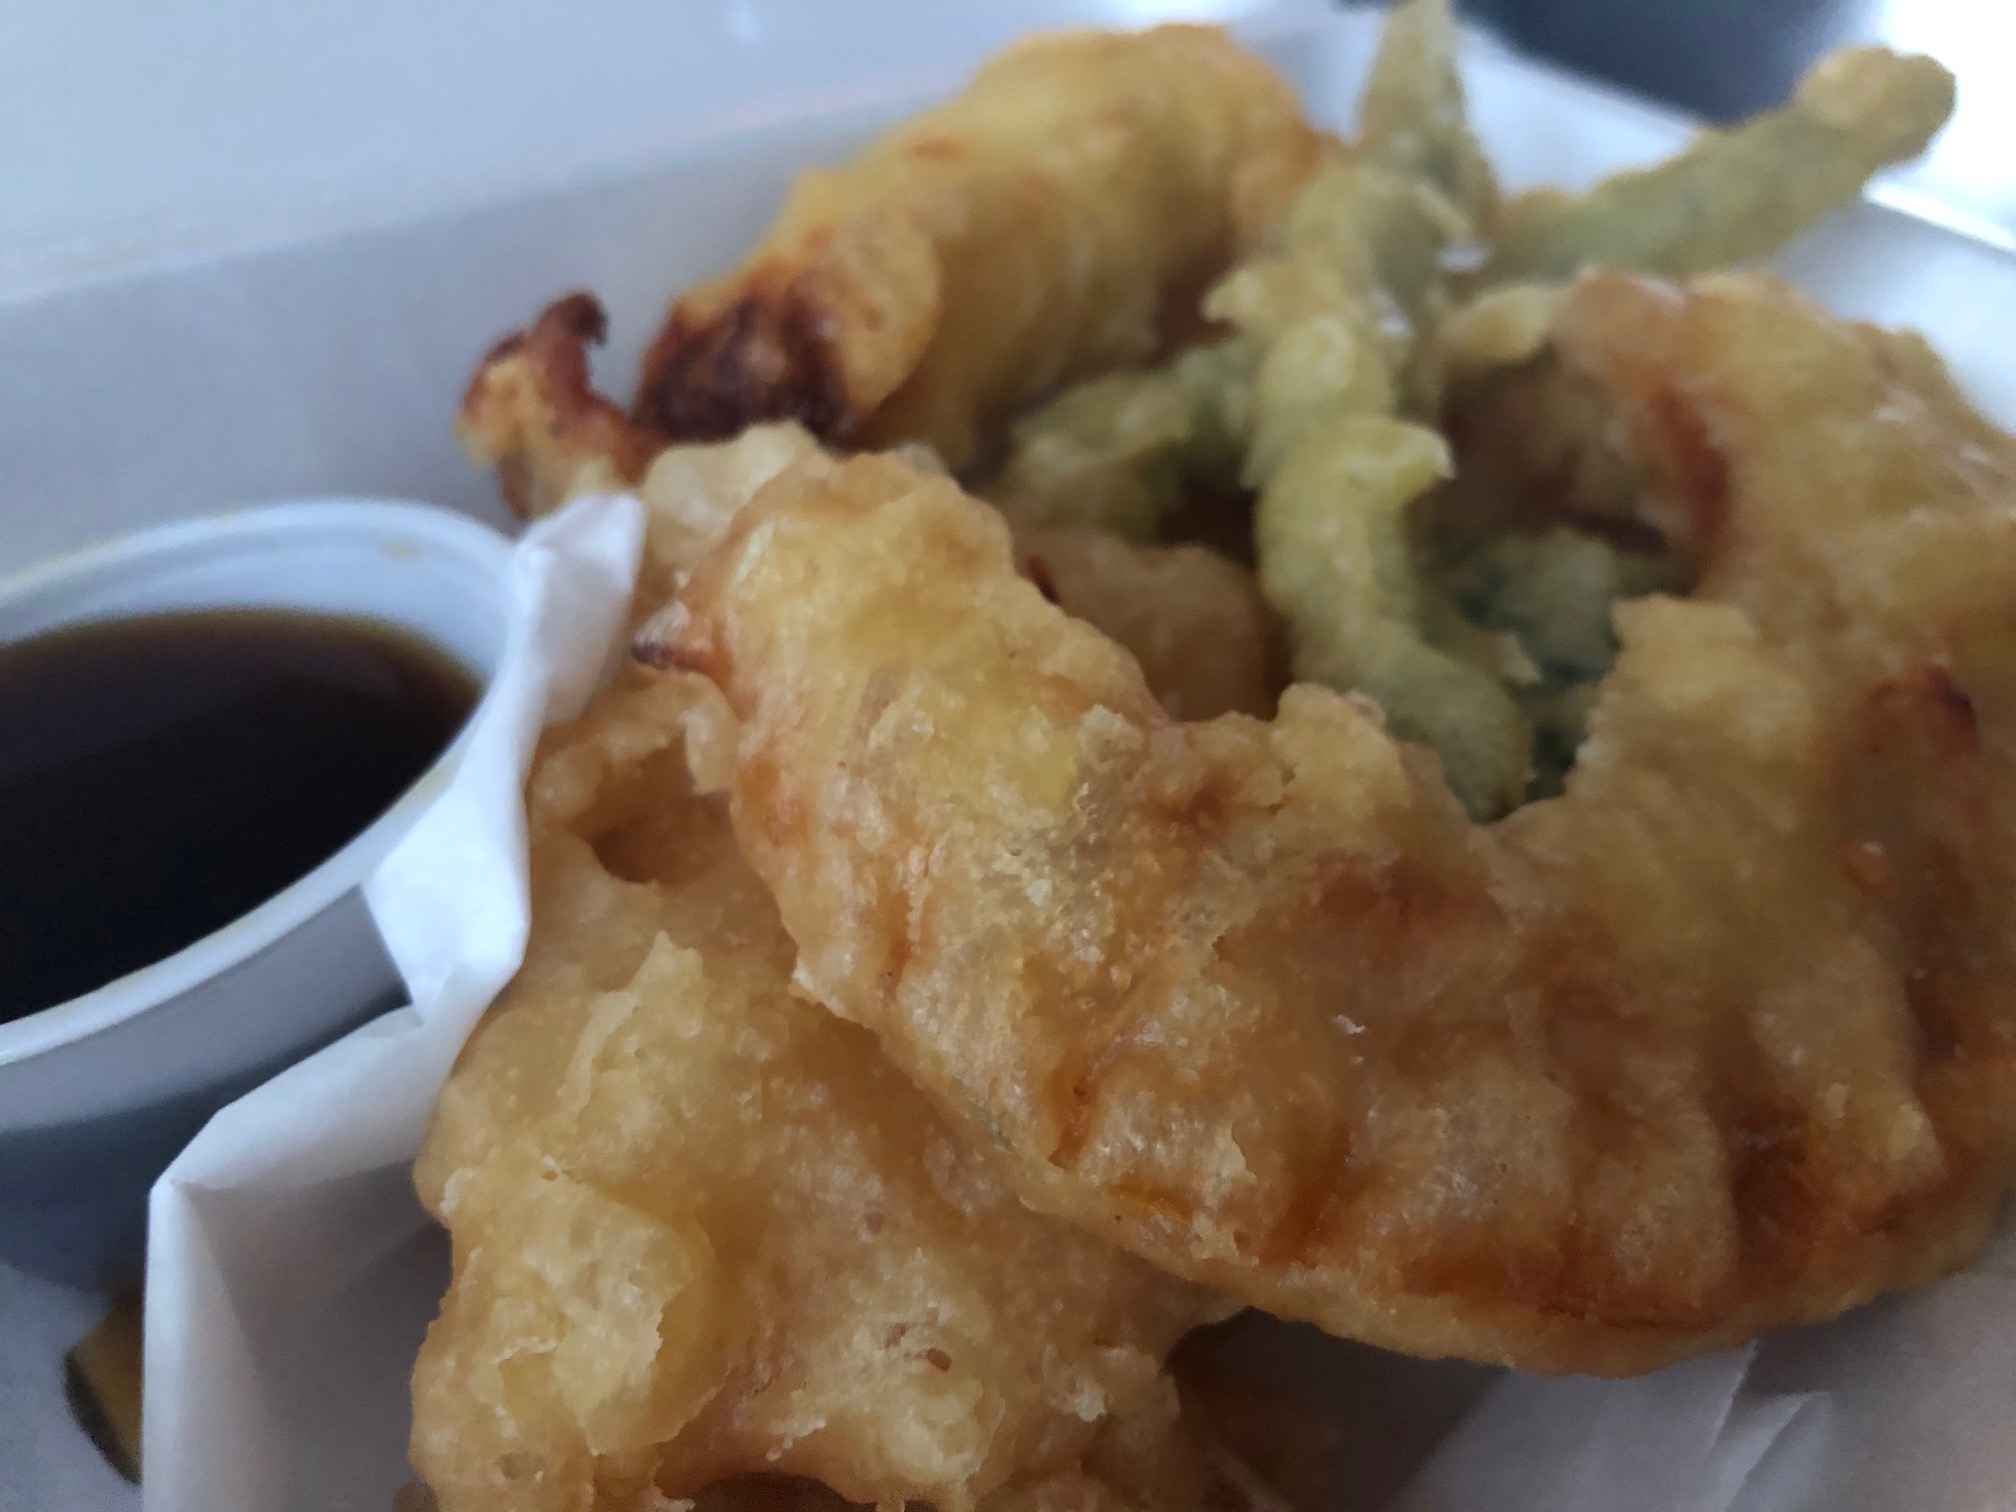 A close up of the vegetable tempura appetizer from Sushi Kame. Photo by Alyssa Buckley.